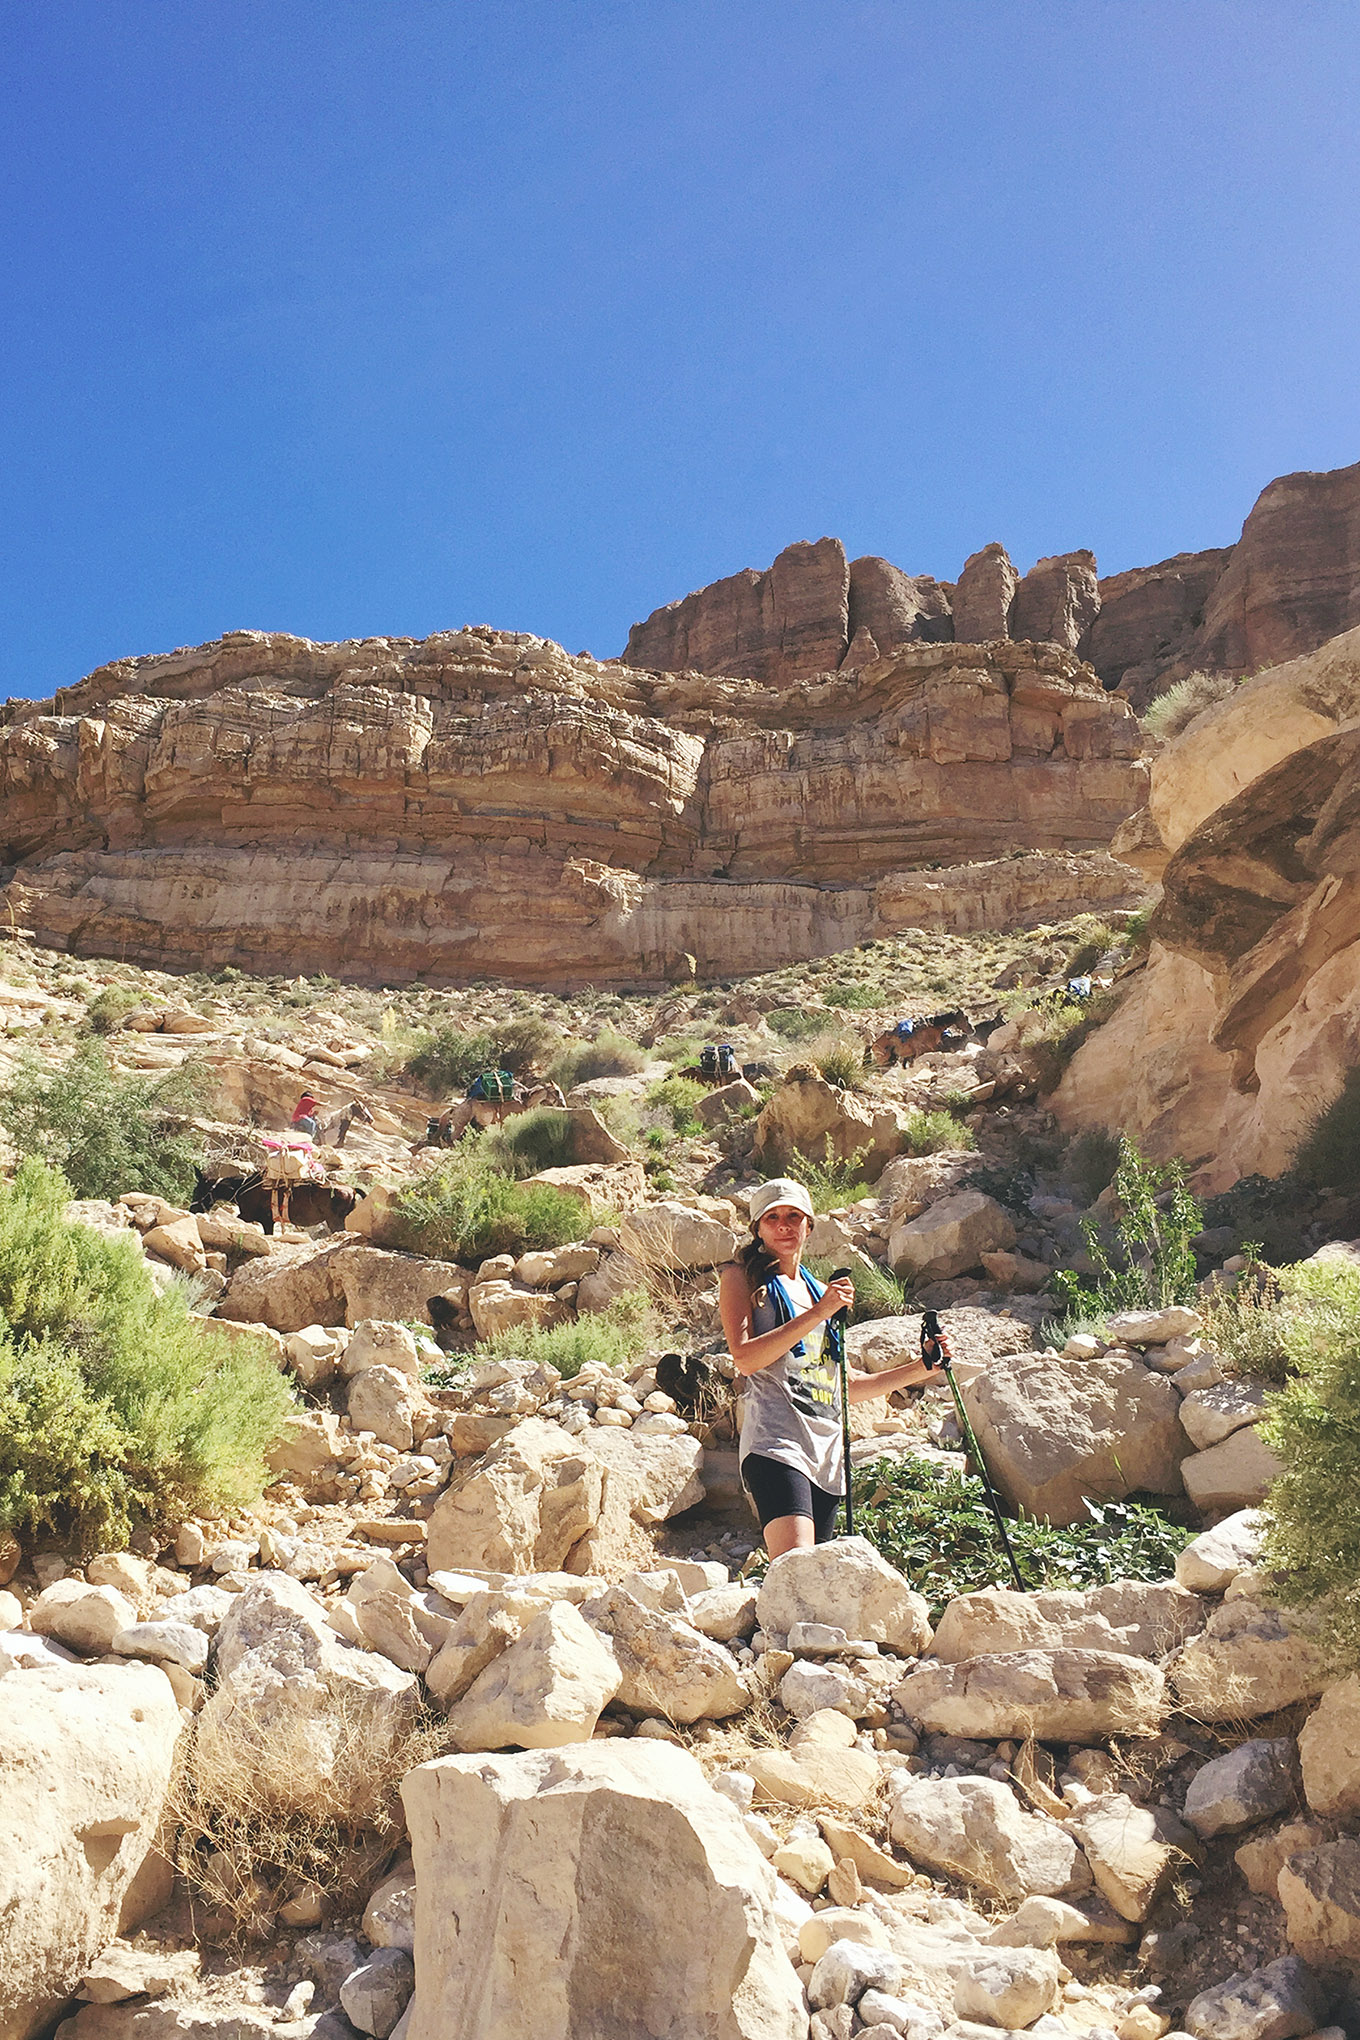 Not only is it doable as a family, it will go down as one of the most memorable adventures you'll experience together! Here's everything you need to know about hiking to Havasupai with kids.